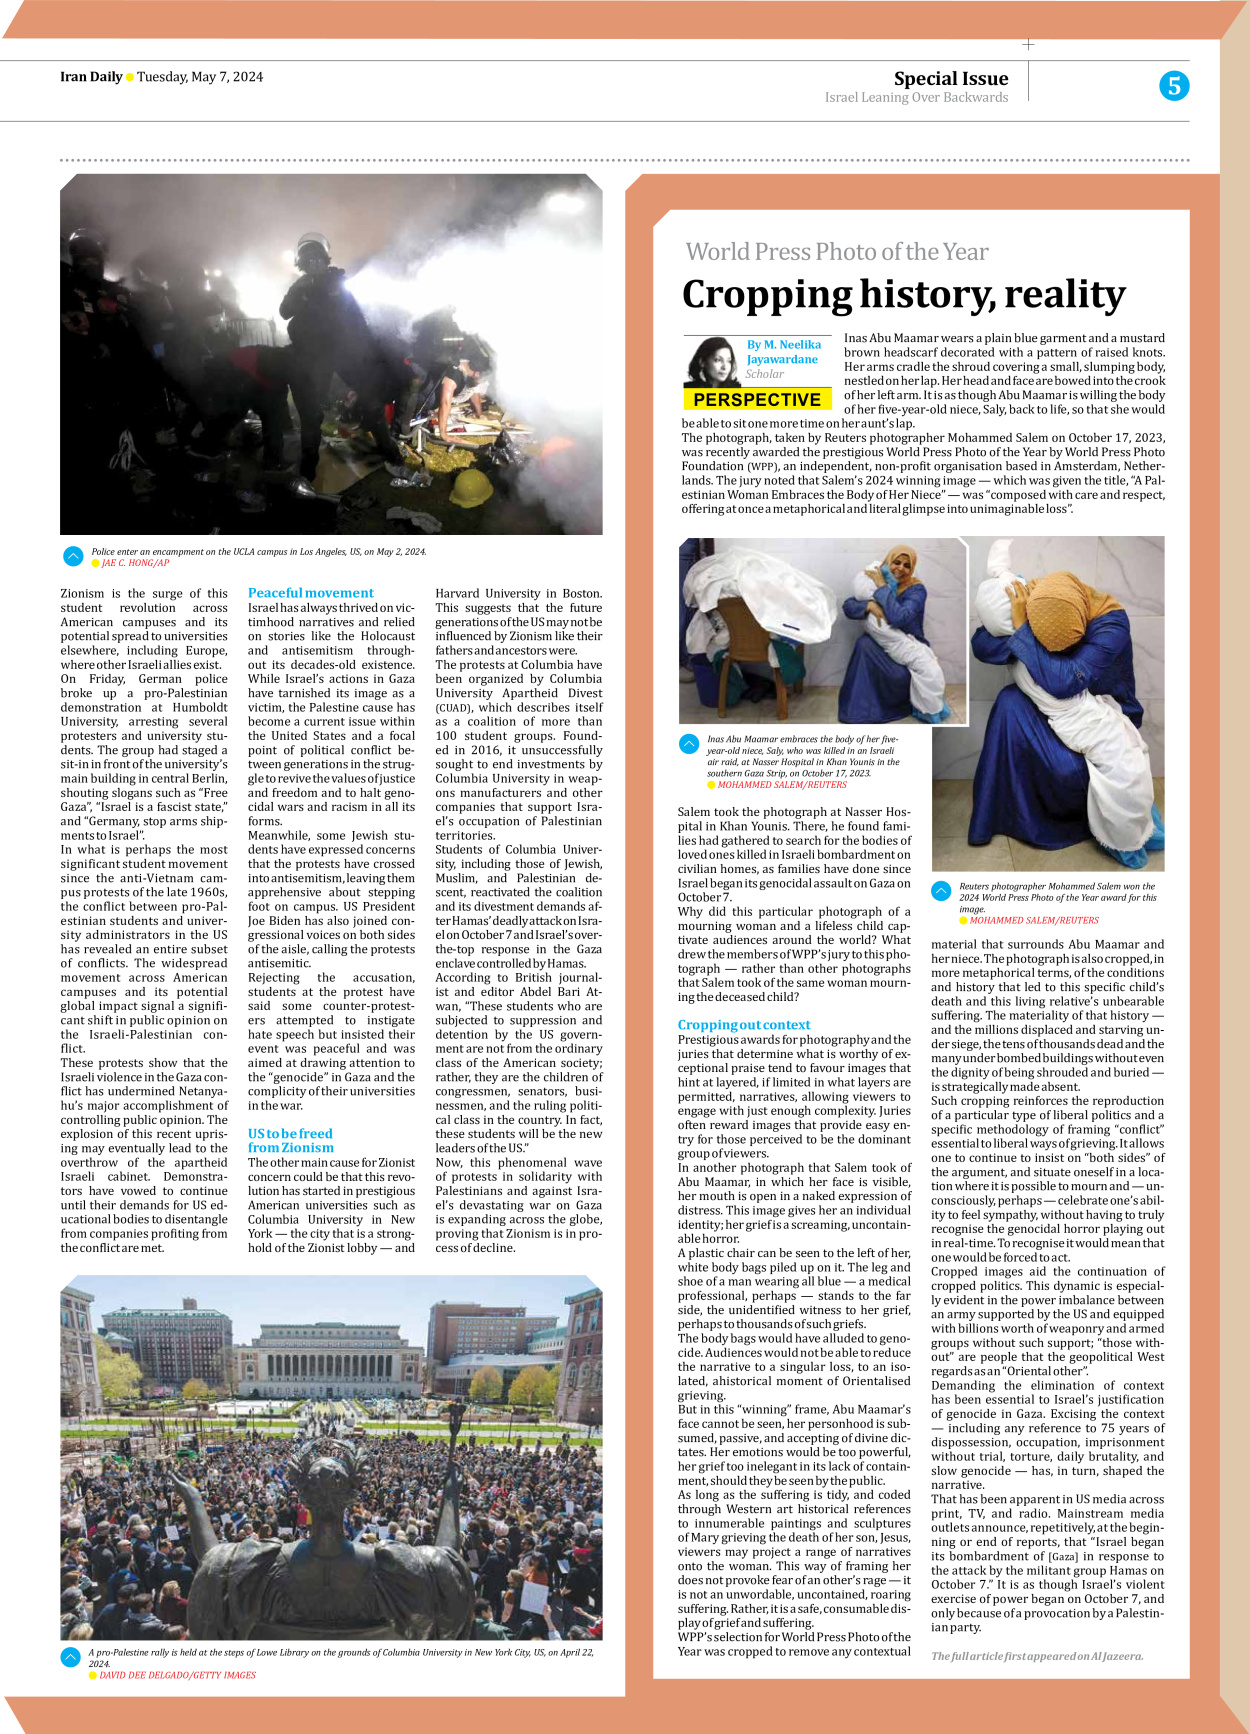 Iran Daily - Number Seven Thousand Five Hundred and Fifty One - 07 May 2024 - Page 5